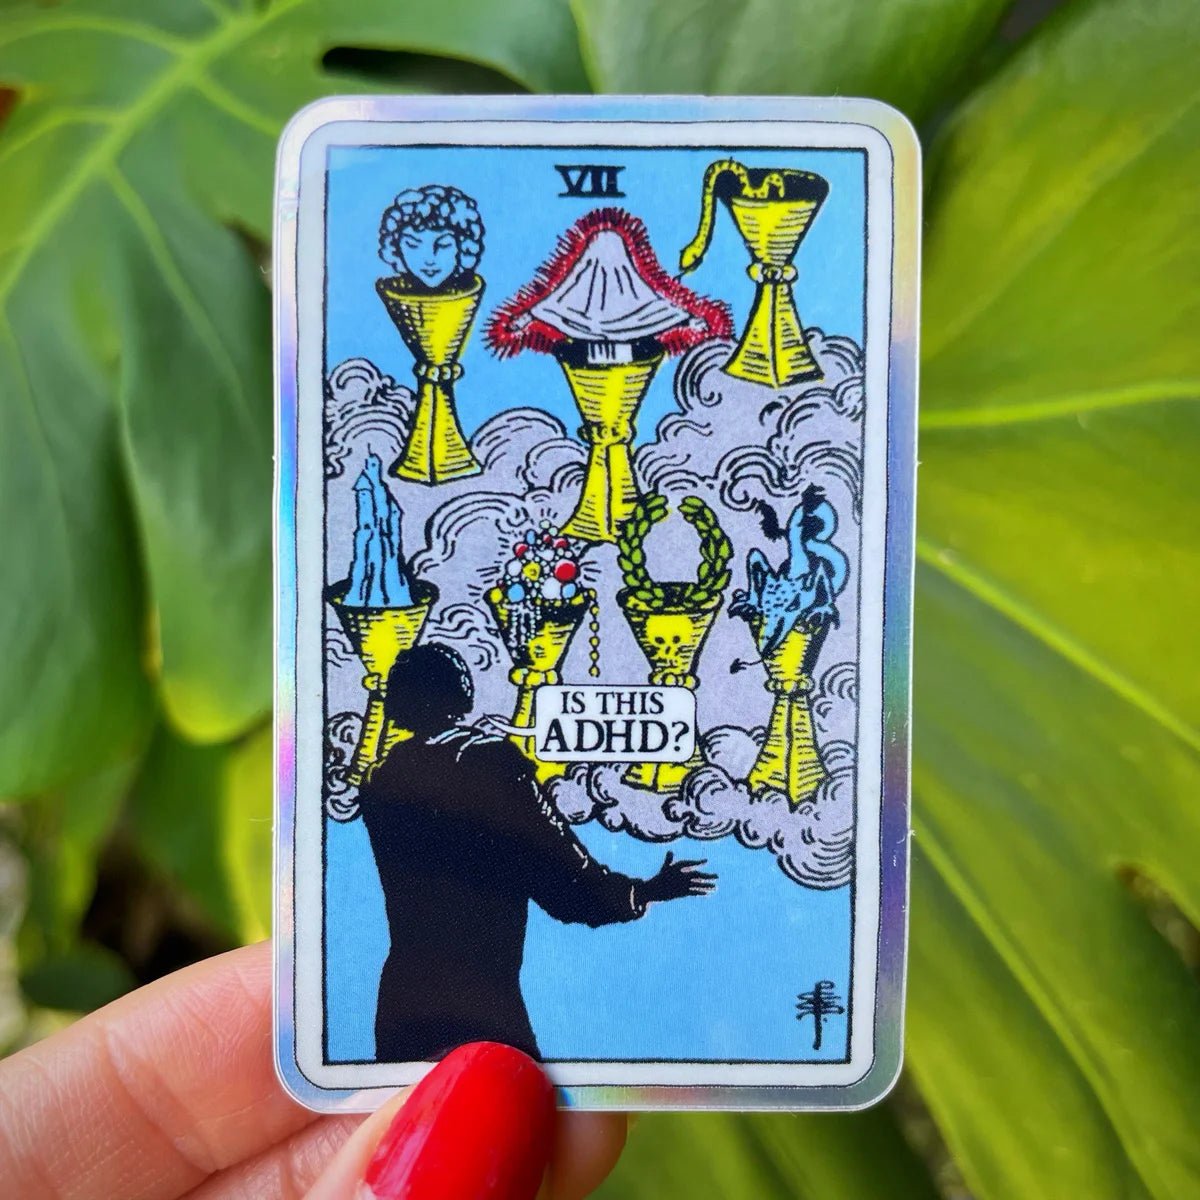 Seven of Cups Holographic Tarot Sticker "Is This ADHD?" - The Mystics Club